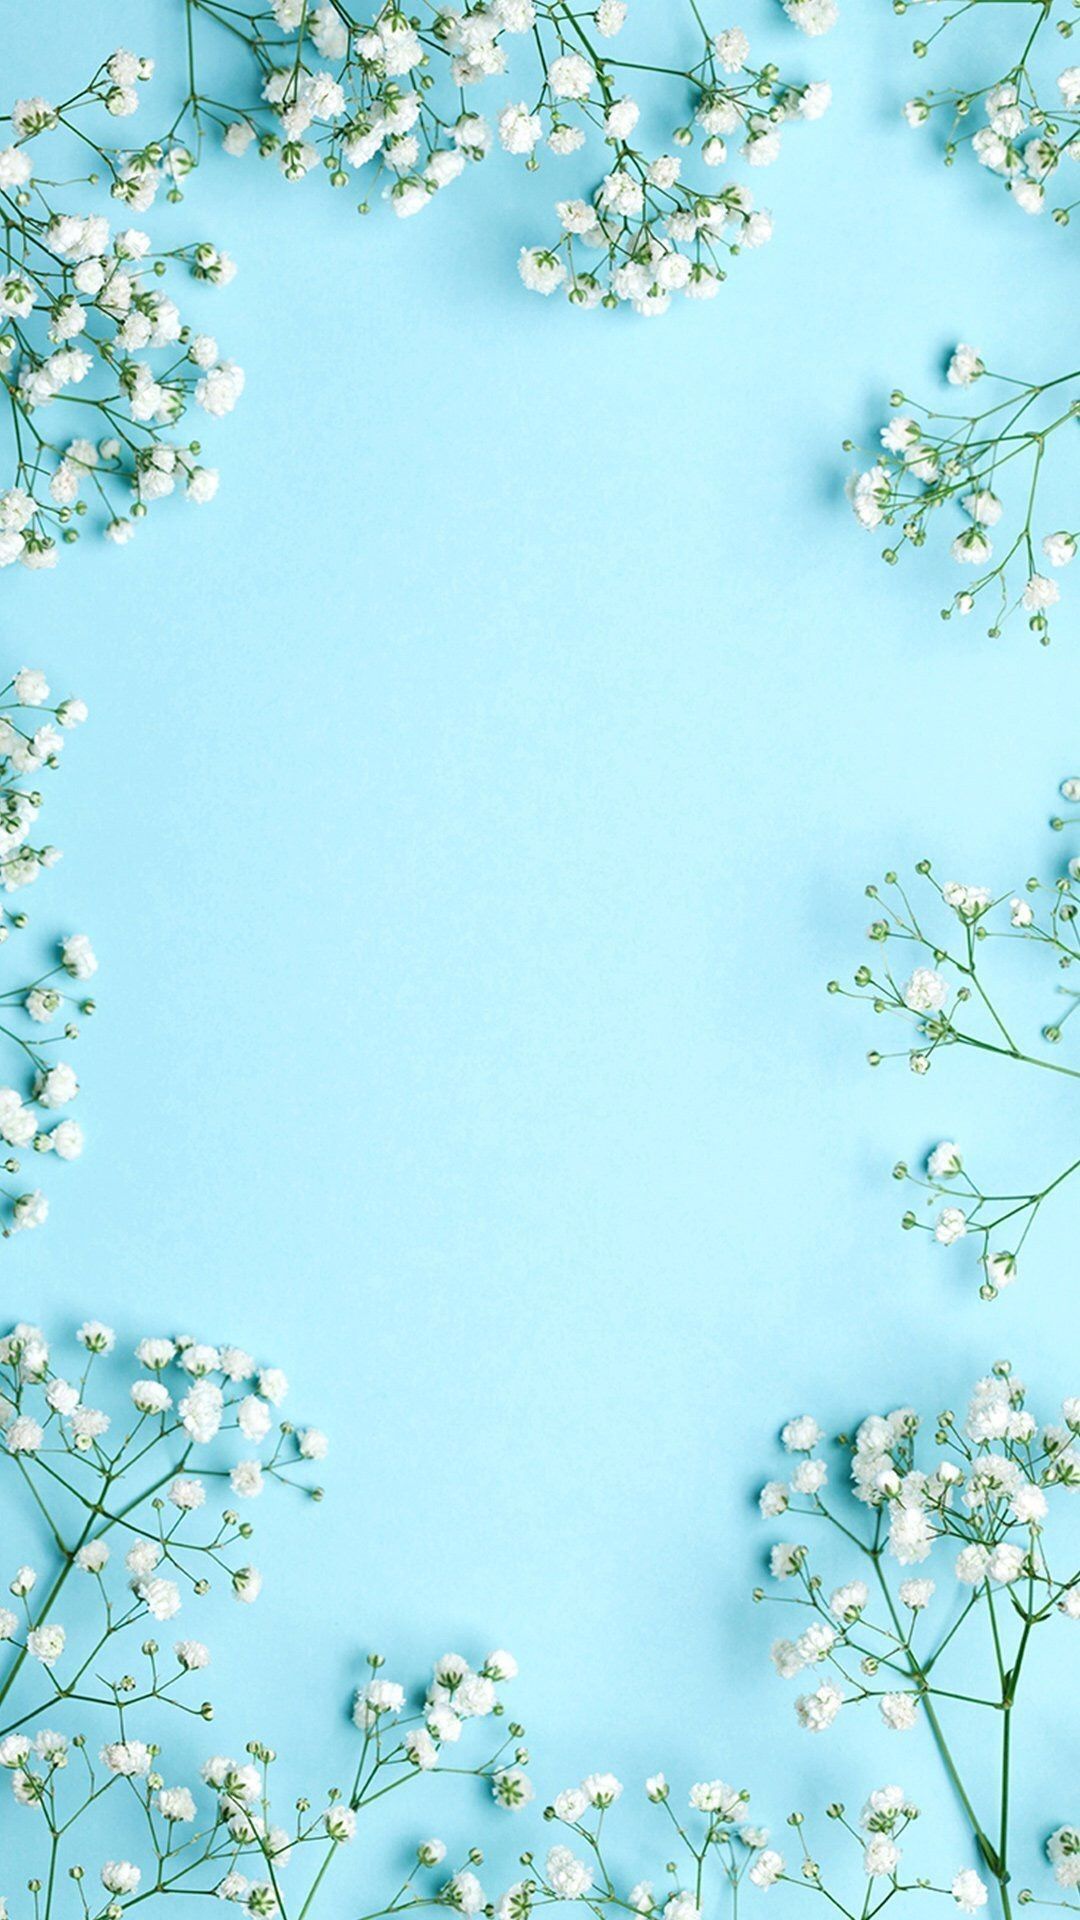 Cute Teal And White Android Backgrounds